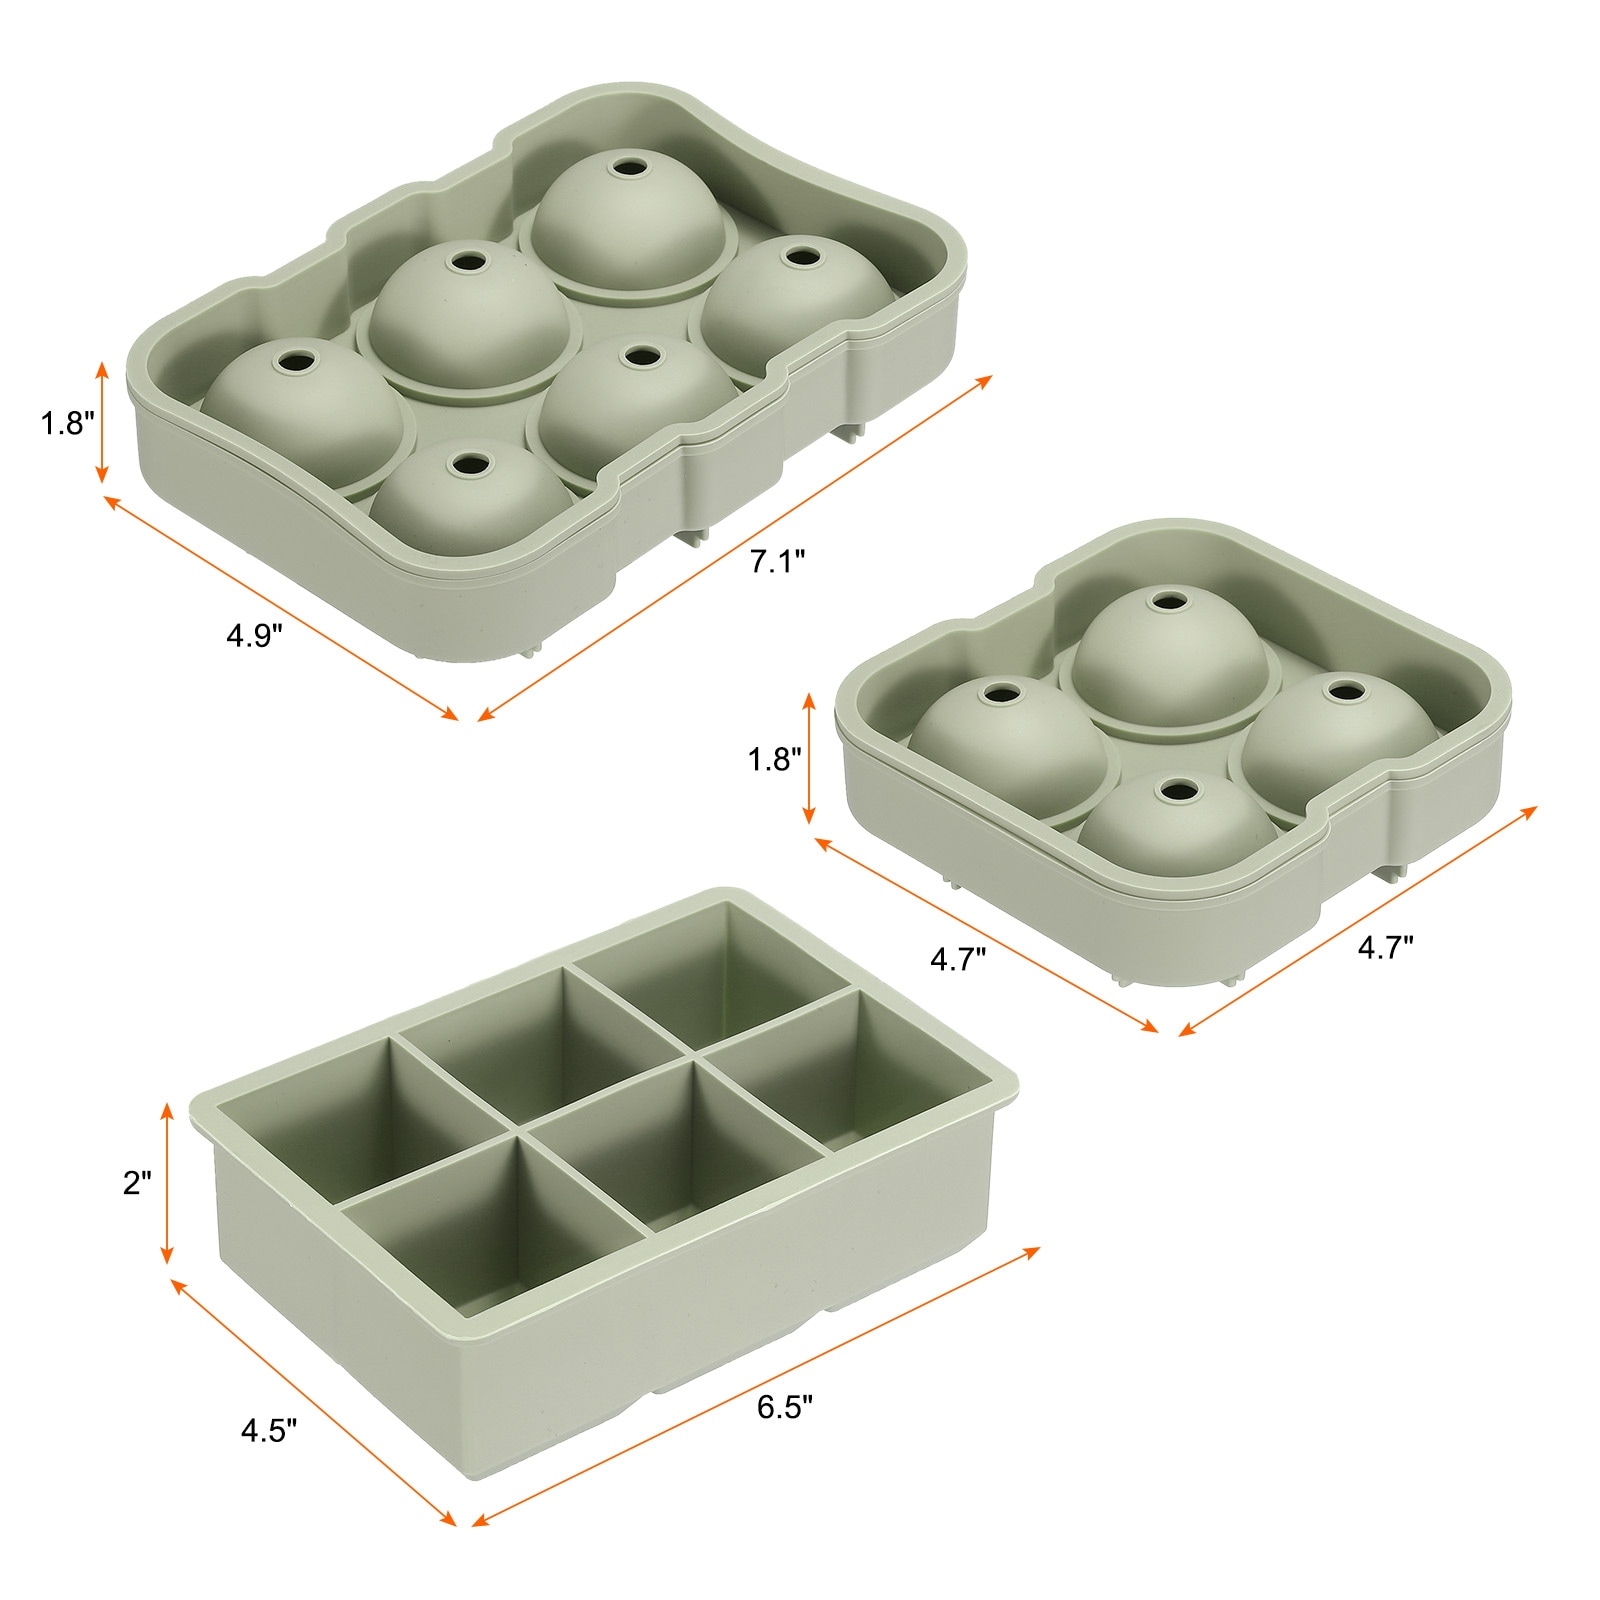 True Sphere Ice Tray, Dishwasher-Safe Silicone Ice Mold, Makes 6